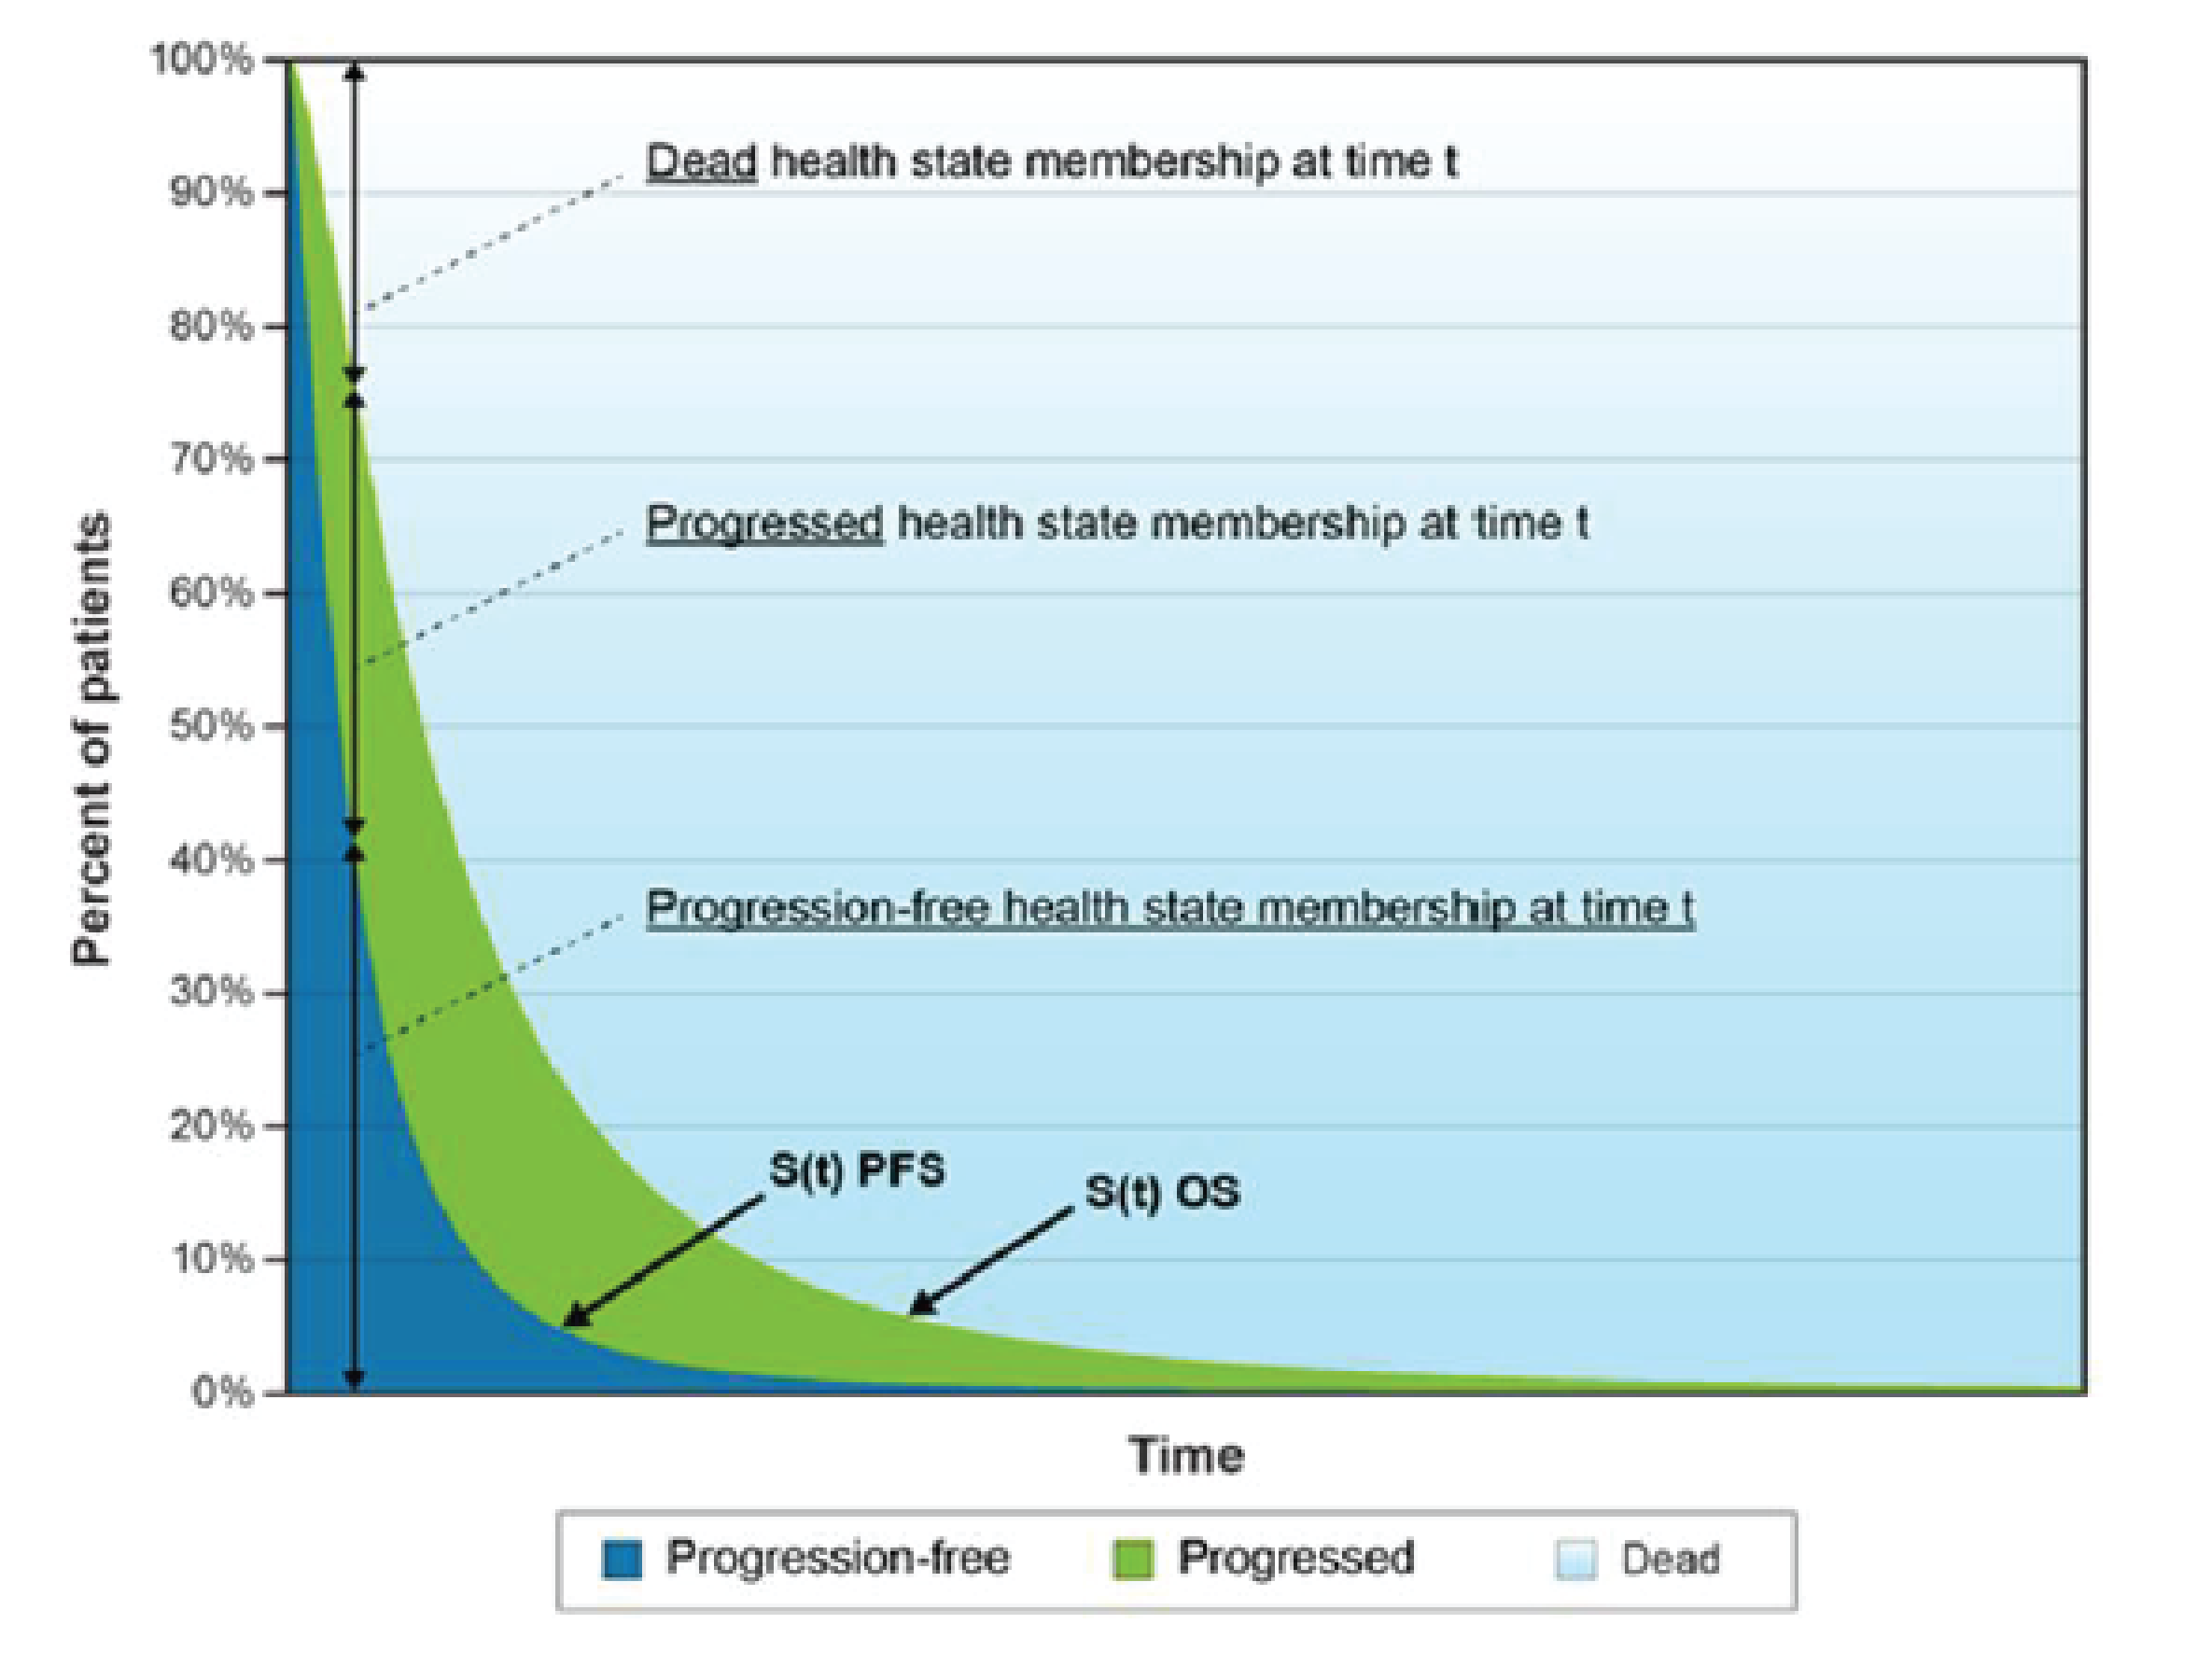 The figure depicts the sponsor’s partitioned survival model. In each cycle, patients can remain in the progression-free health state, experience progression of disease or die. The probability of these events are determined from the extrapolated Kaplan-Meier curves within the sponsor’s analysis.